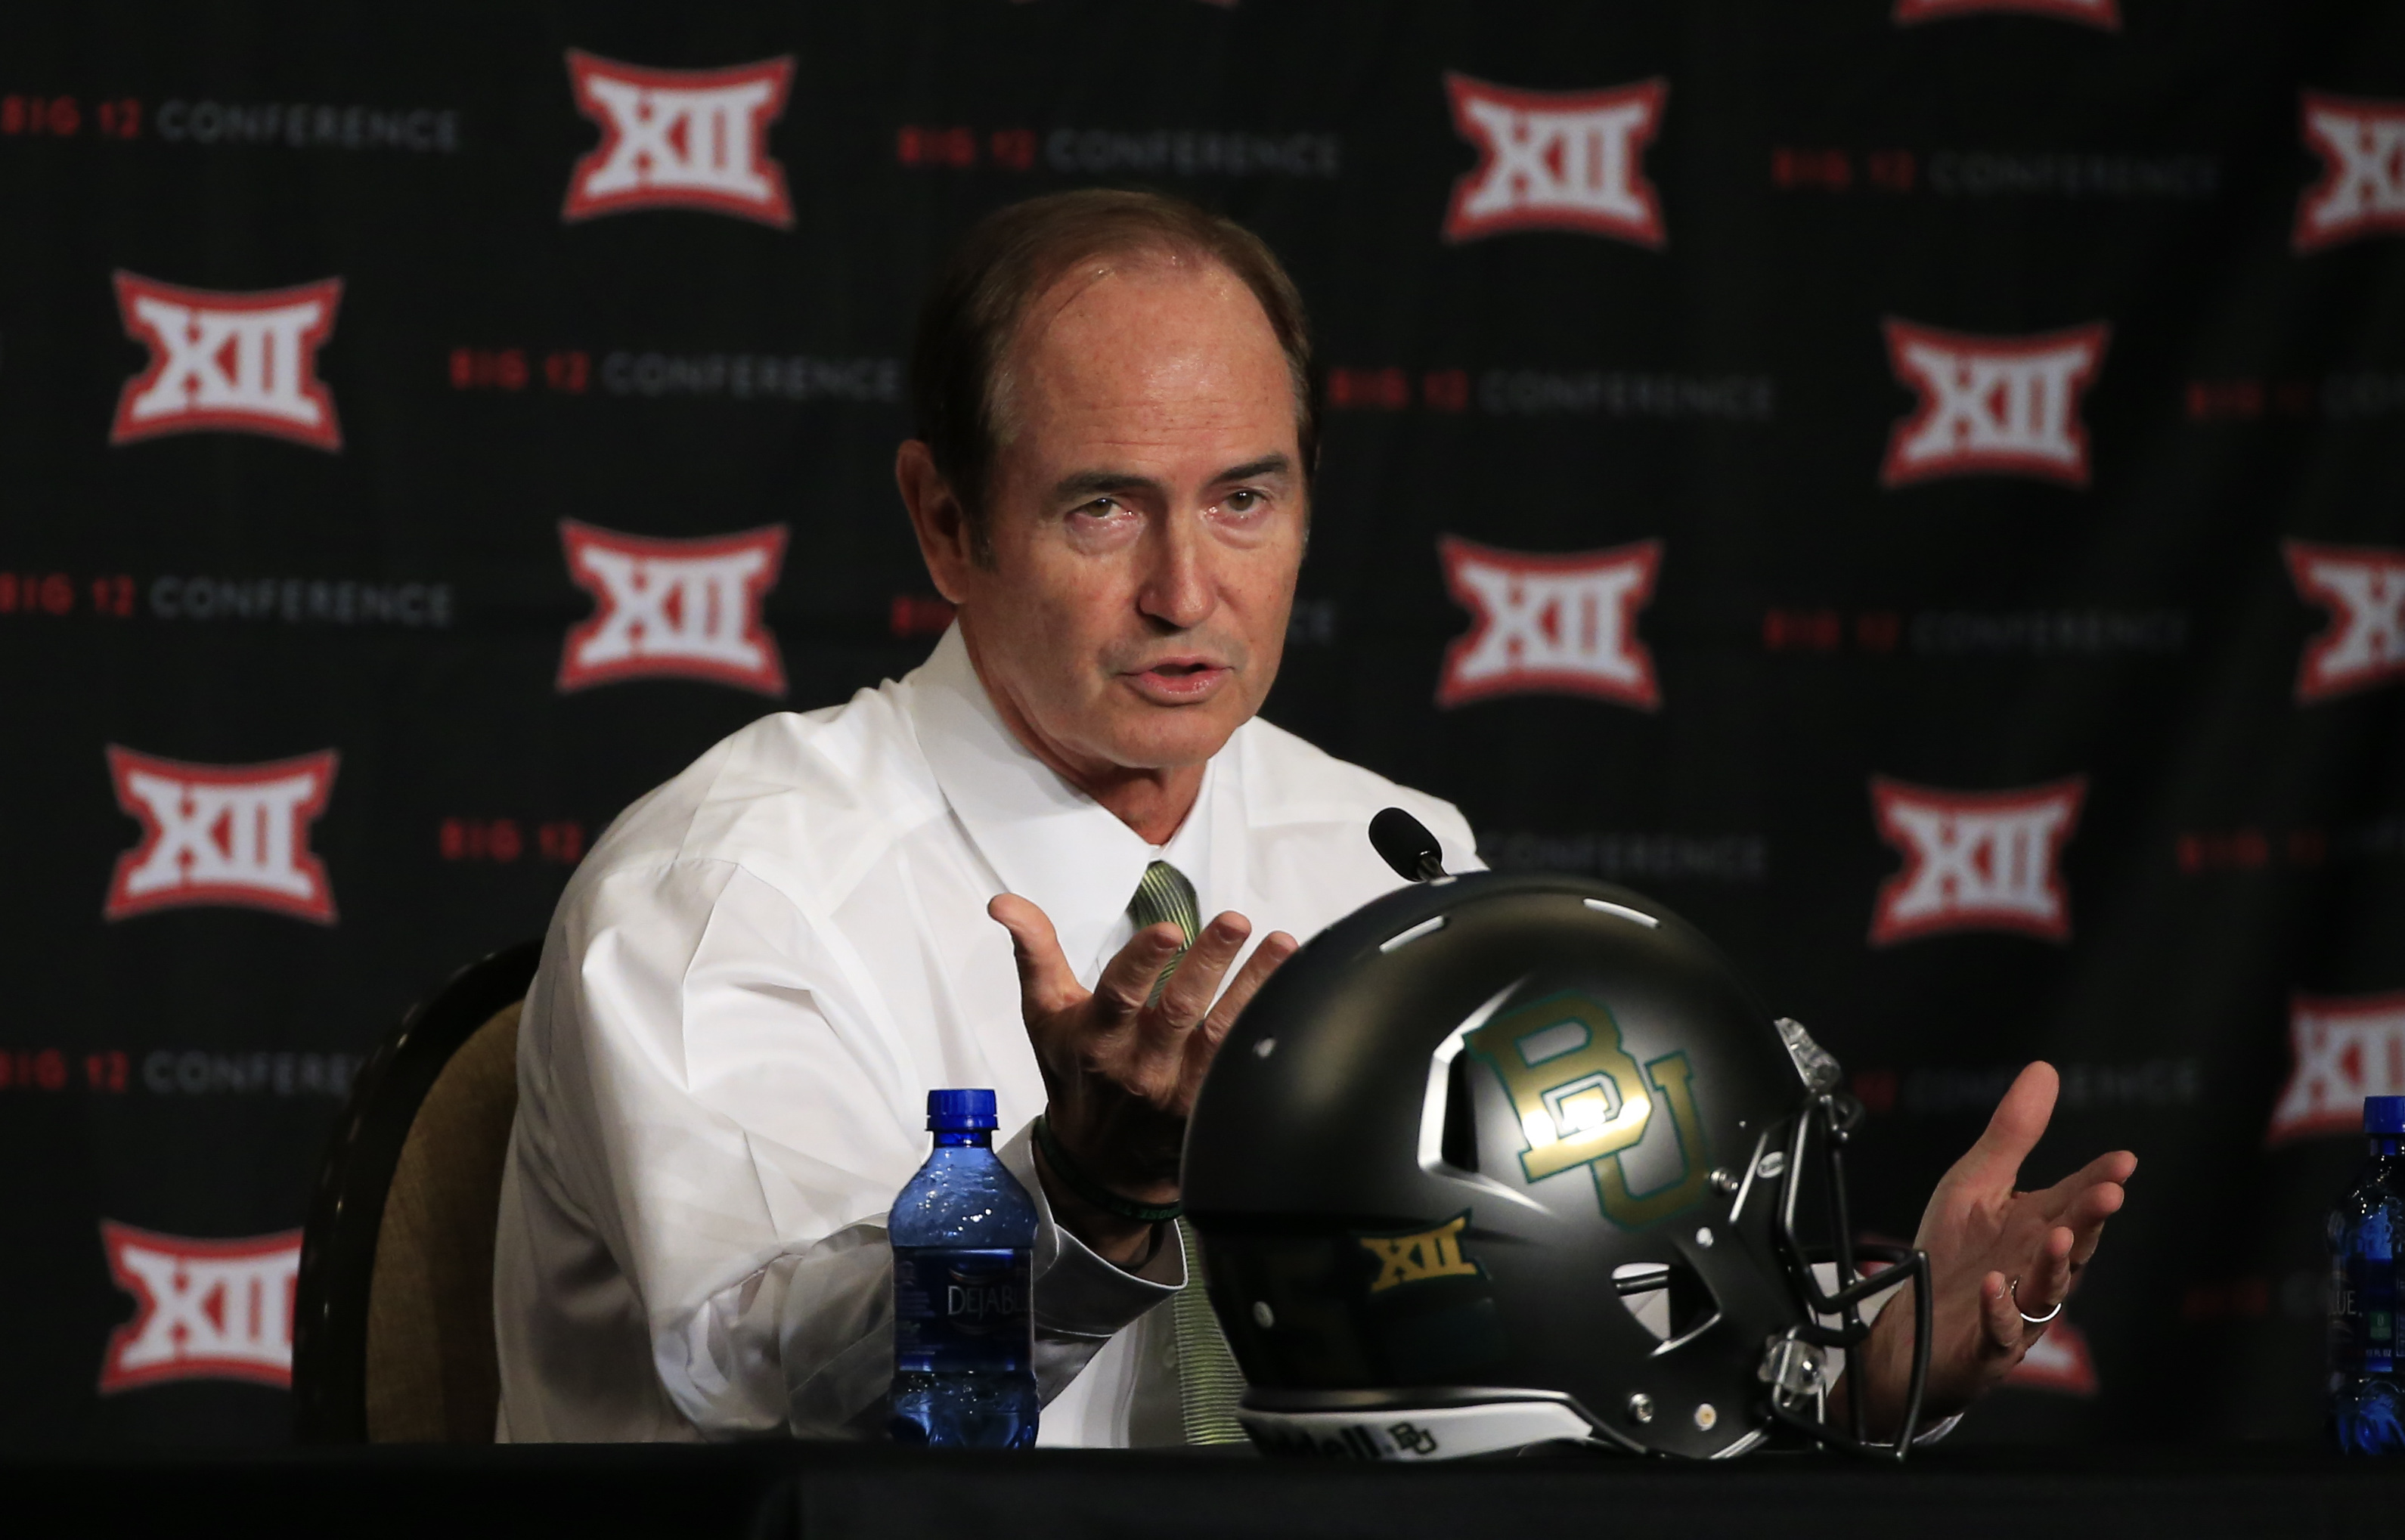 "Well, Carter, that's an absolutely fascinating question. Thank you for asking it." -Art Briles, probably not